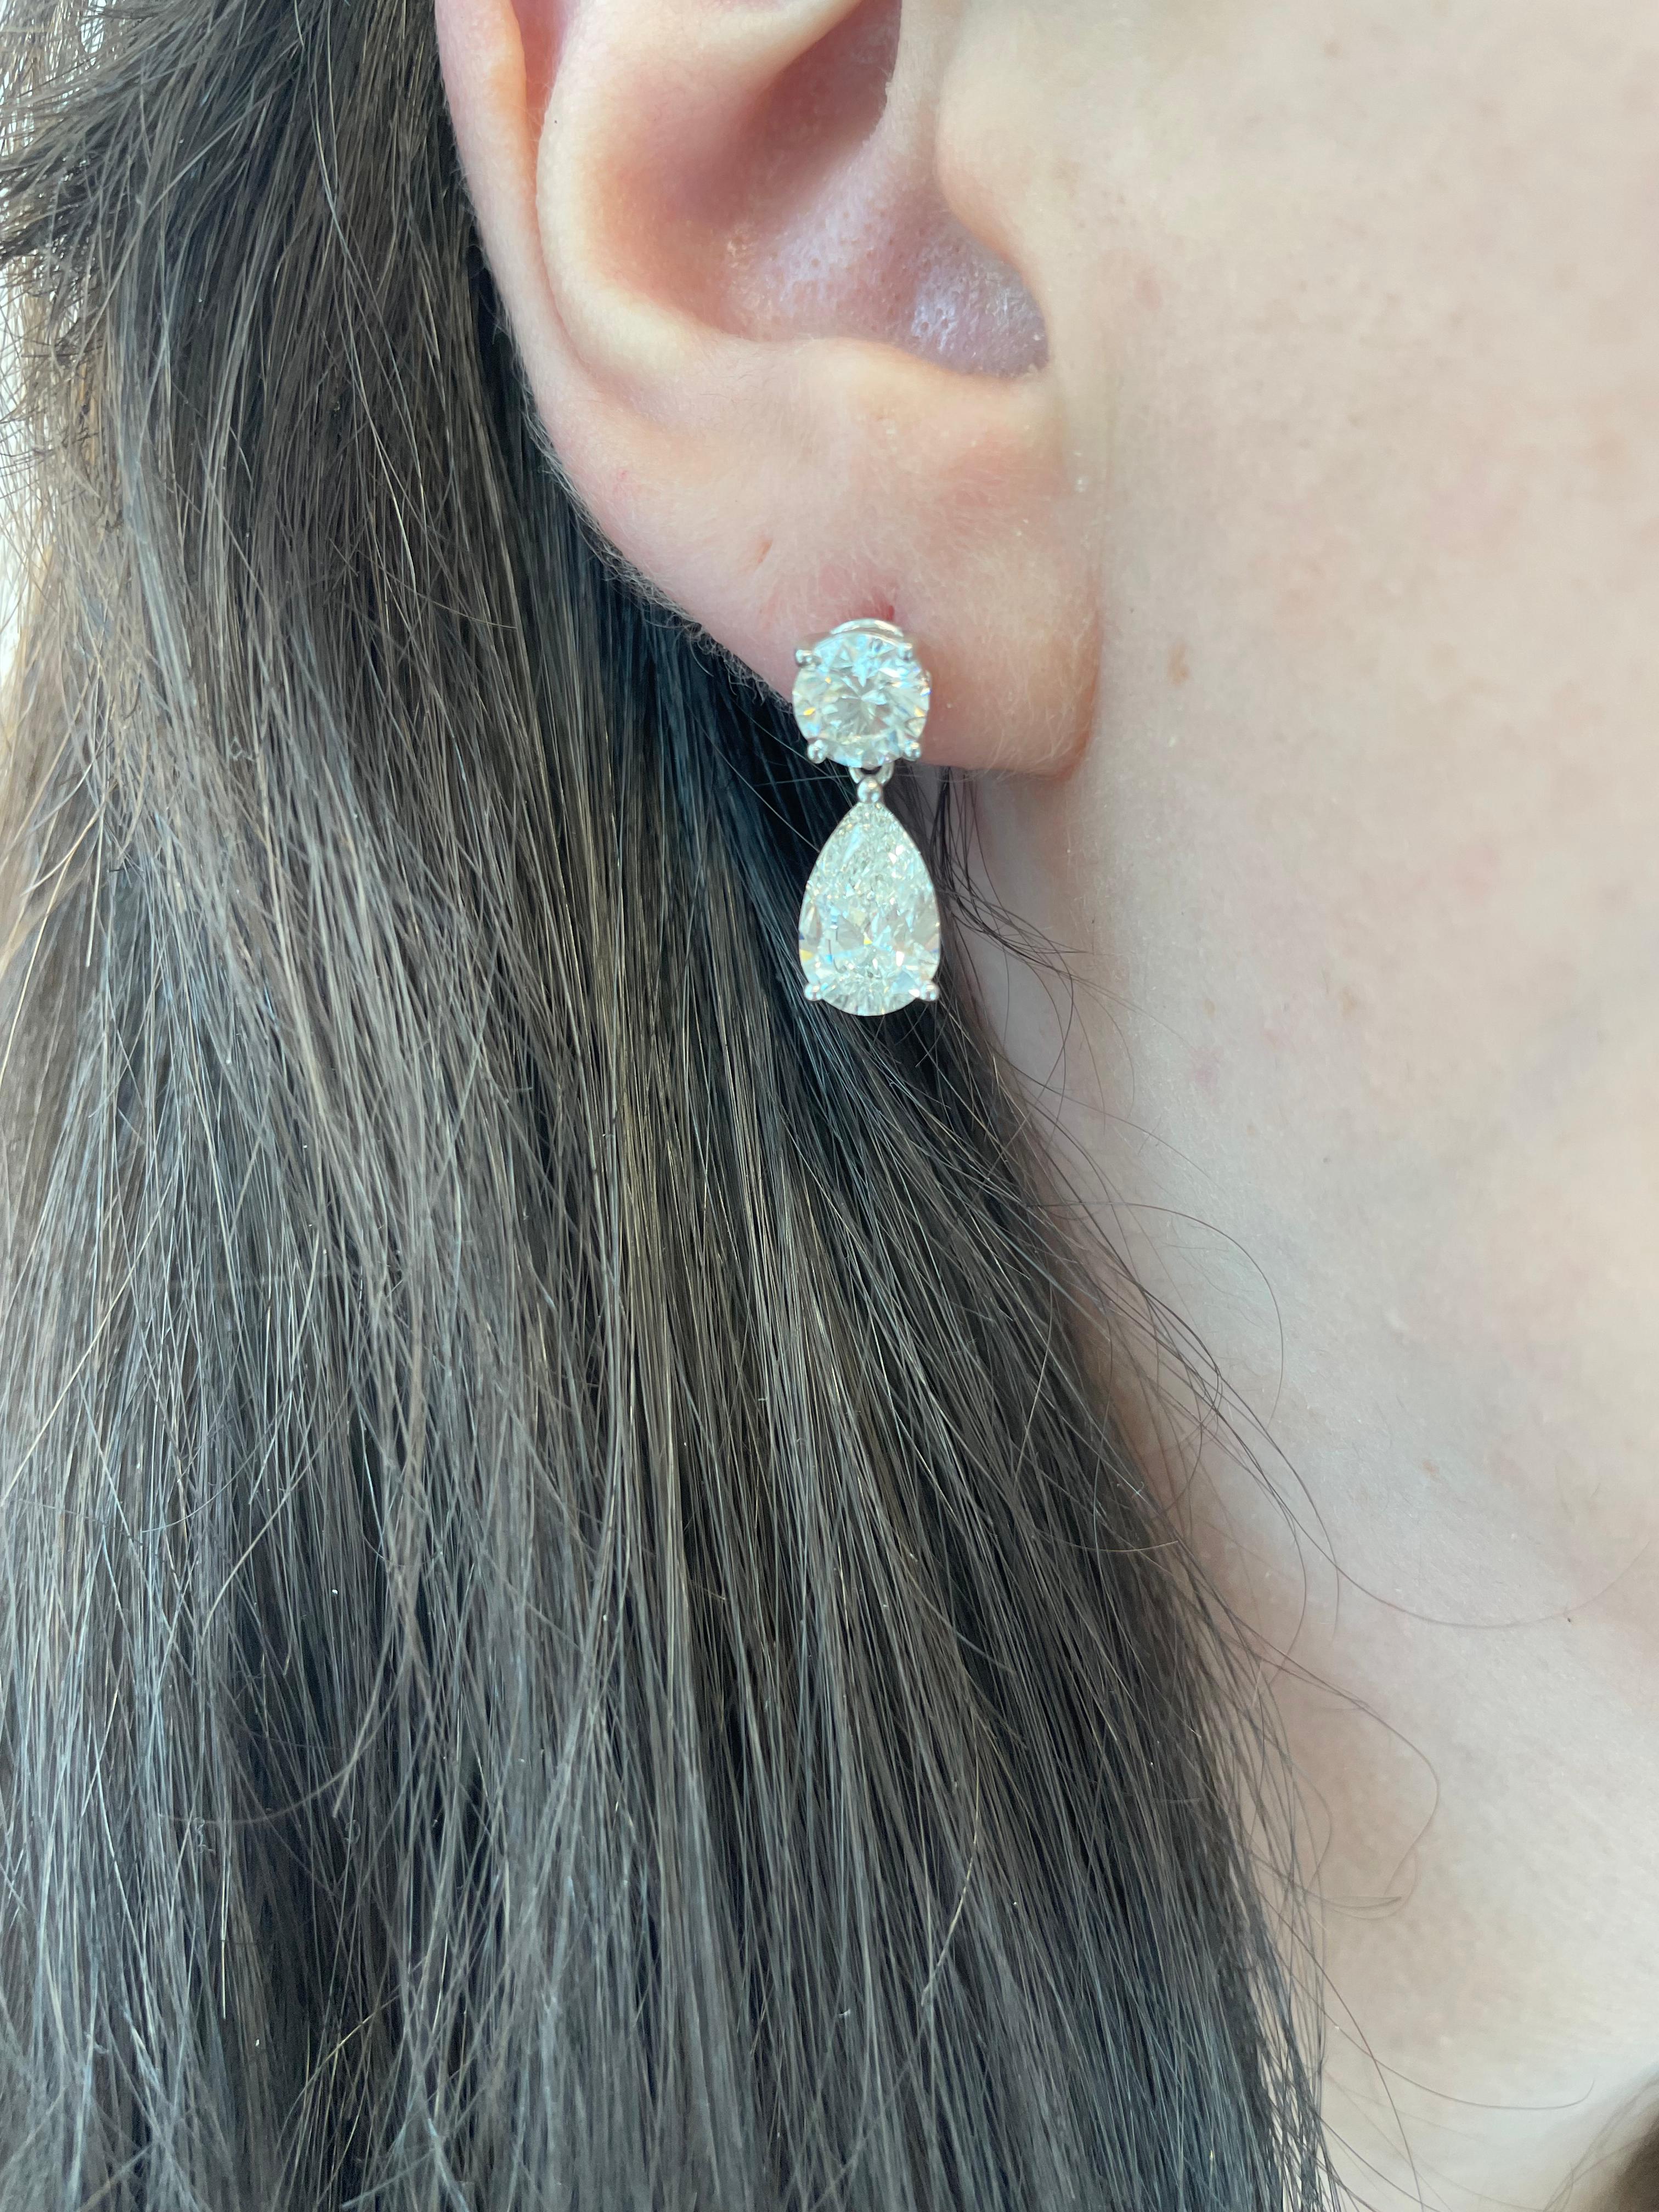 Classic diamond stud earrings, each stone GIA certified. The bottom pear shape diamonds are detachable by Alexander Beverly Hills.
4.68 carats total diamond weight.
Two matching pear shape diamonds, 3.02 carats total. Both I color and SI2 clarity.